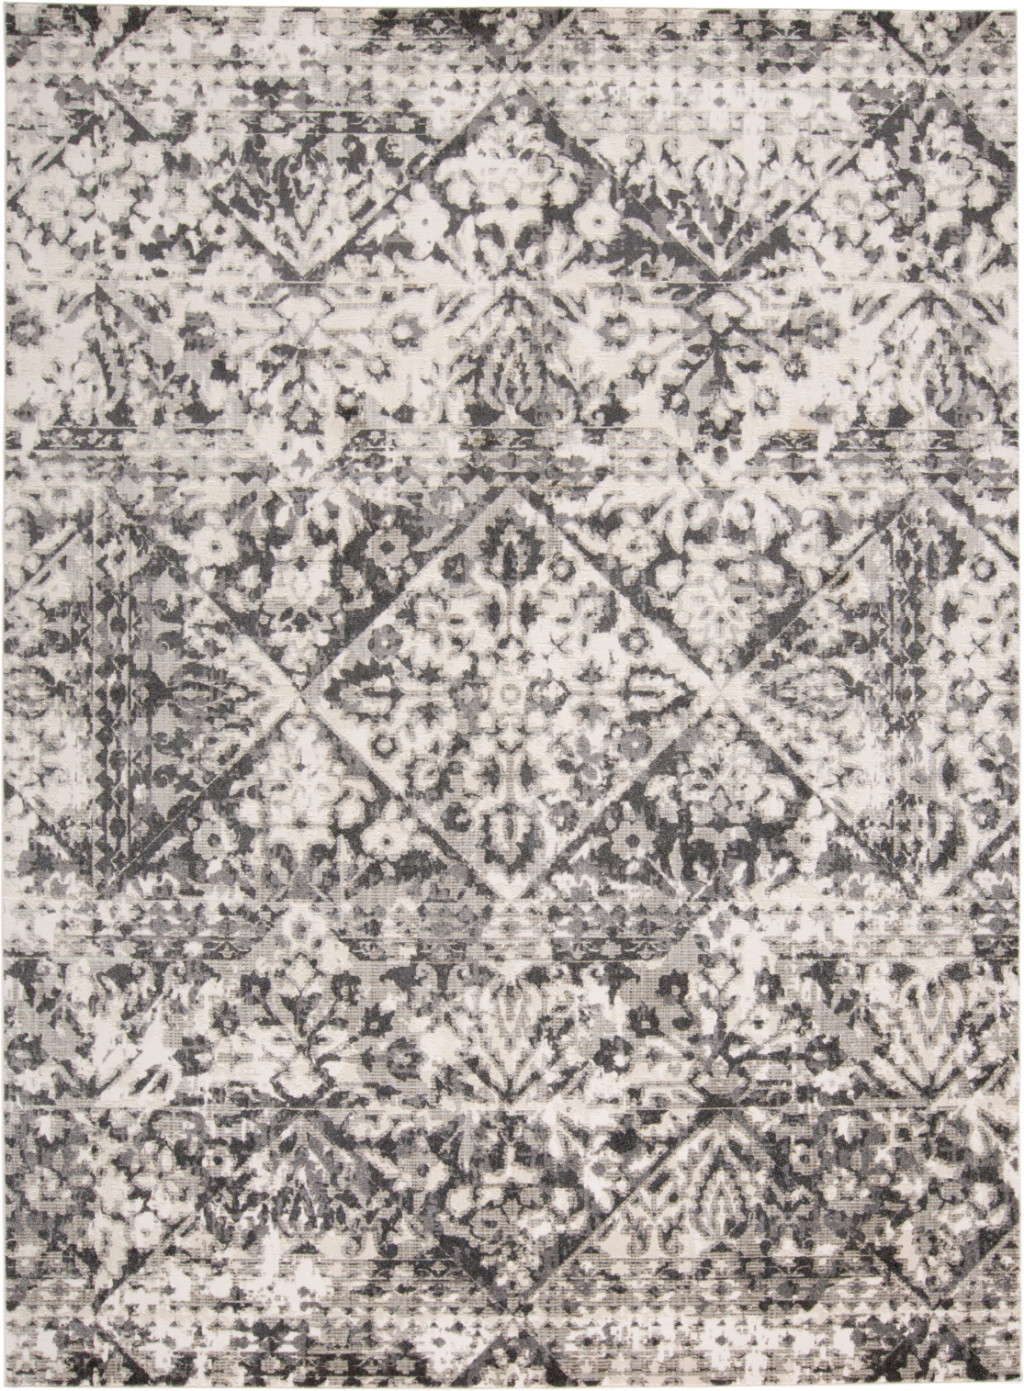 10' X 14' Gray Ivory And Silver Abstract Stain Resistant Area Rug-512096-1